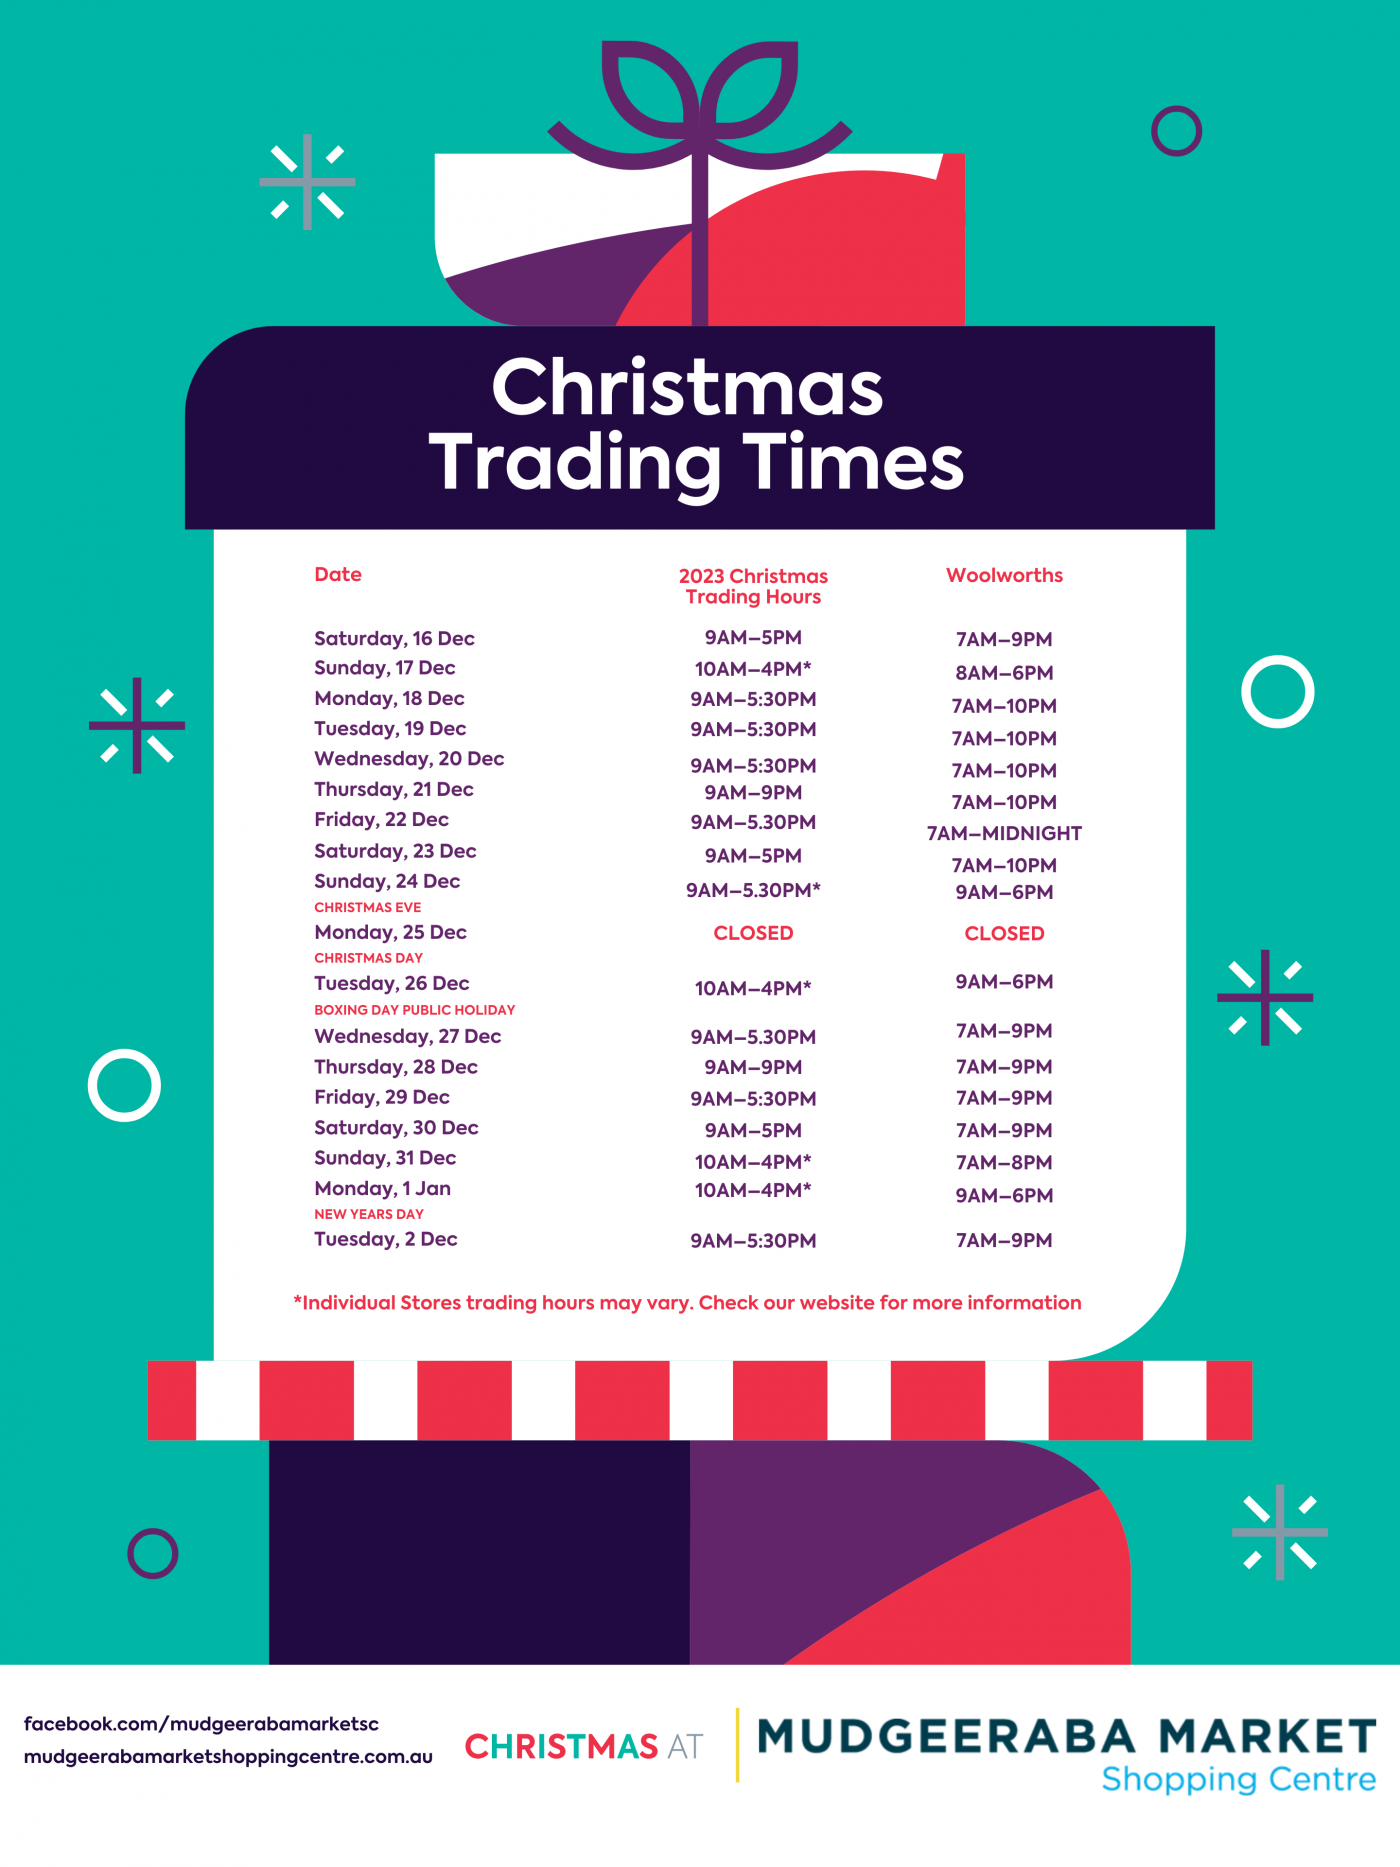 Mudgeeraba Christmas Trading Times 30x40 Poster 5